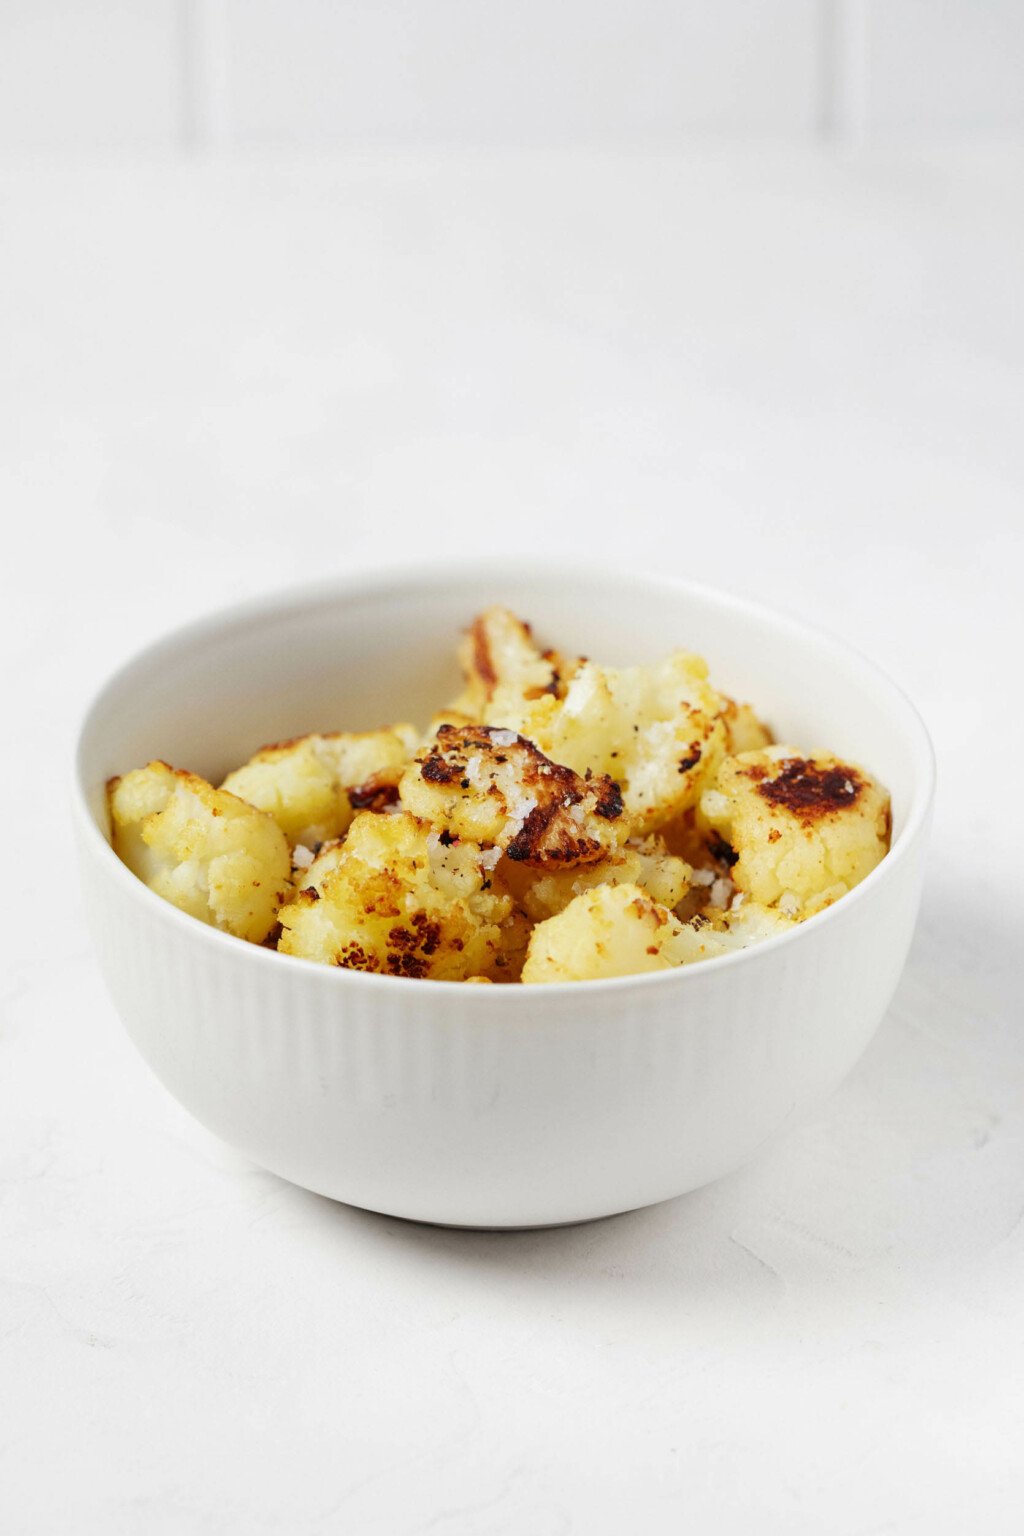 A white, ceramic bowl is resting on a white surface, with a white tile backdrop behind it. The bowl is filled with pieces of roasted cauliflower.